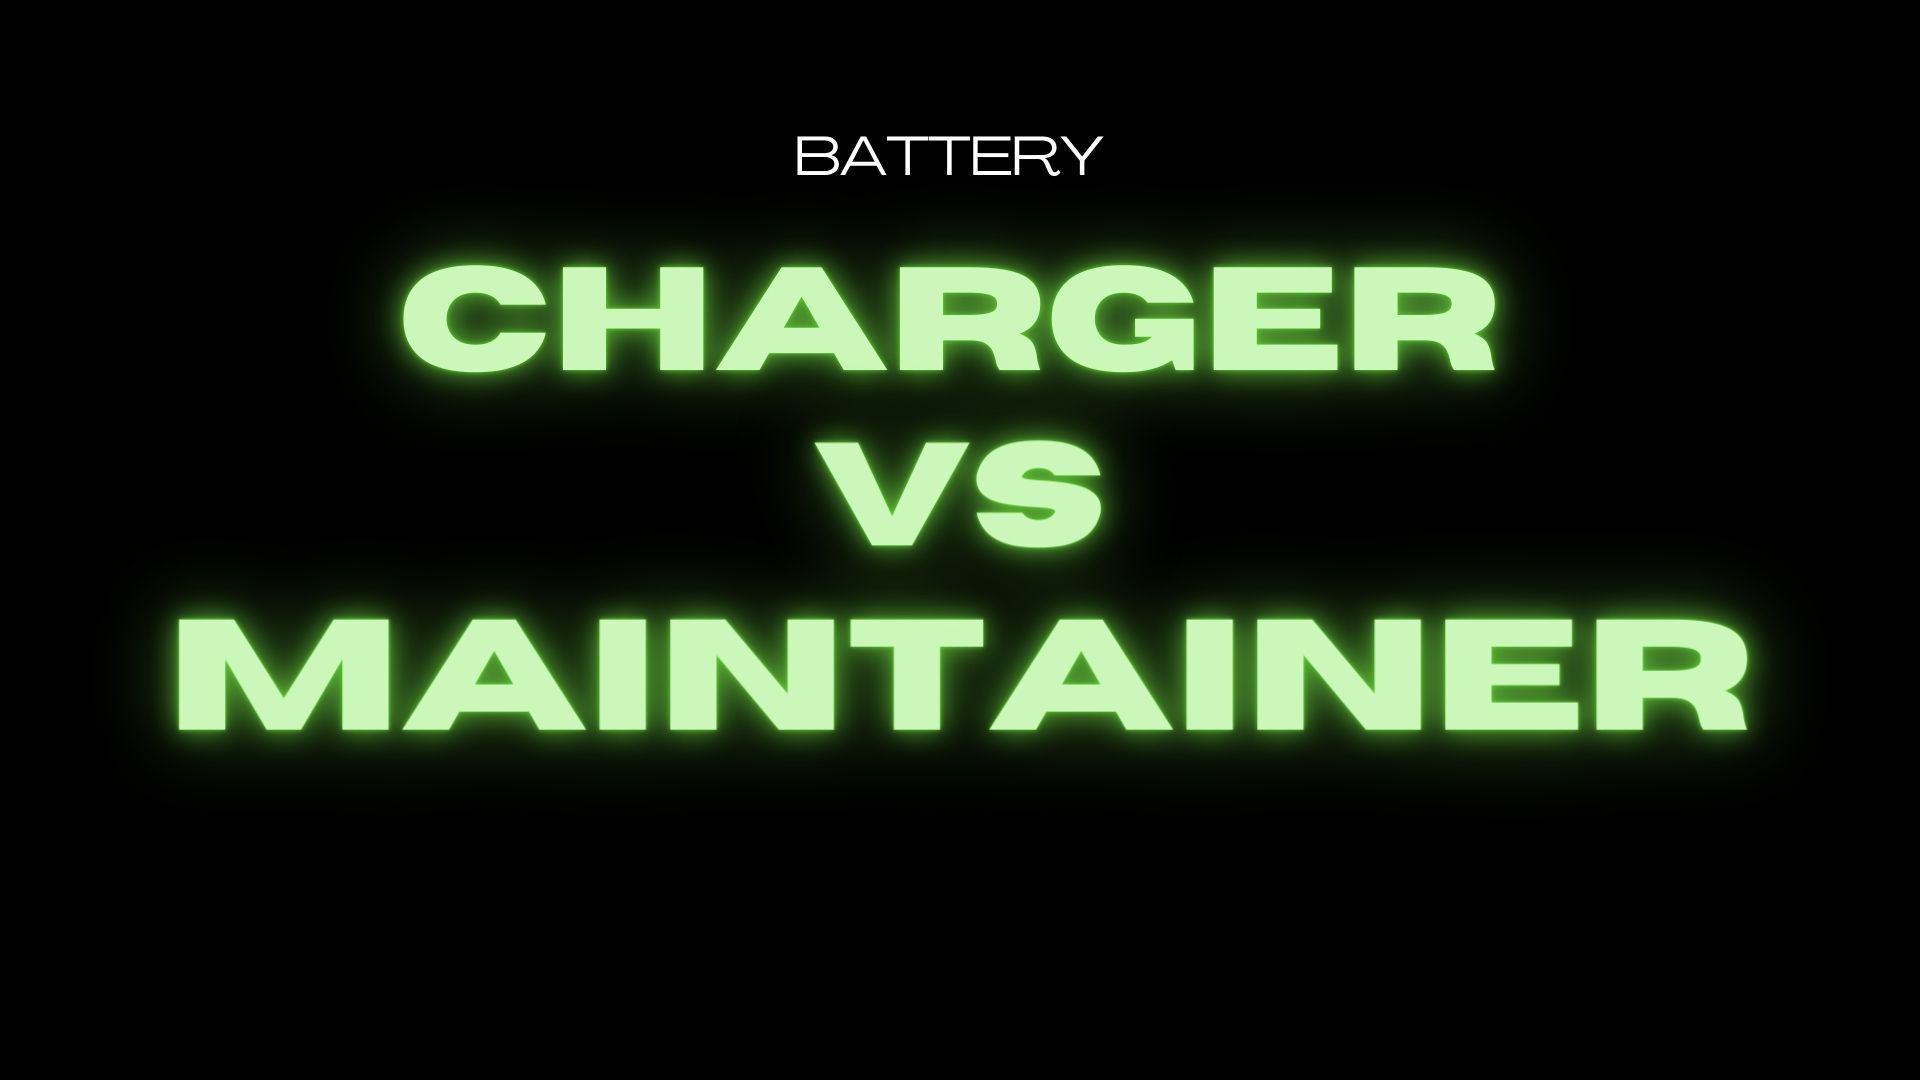 Battery Charger vs Maintainer